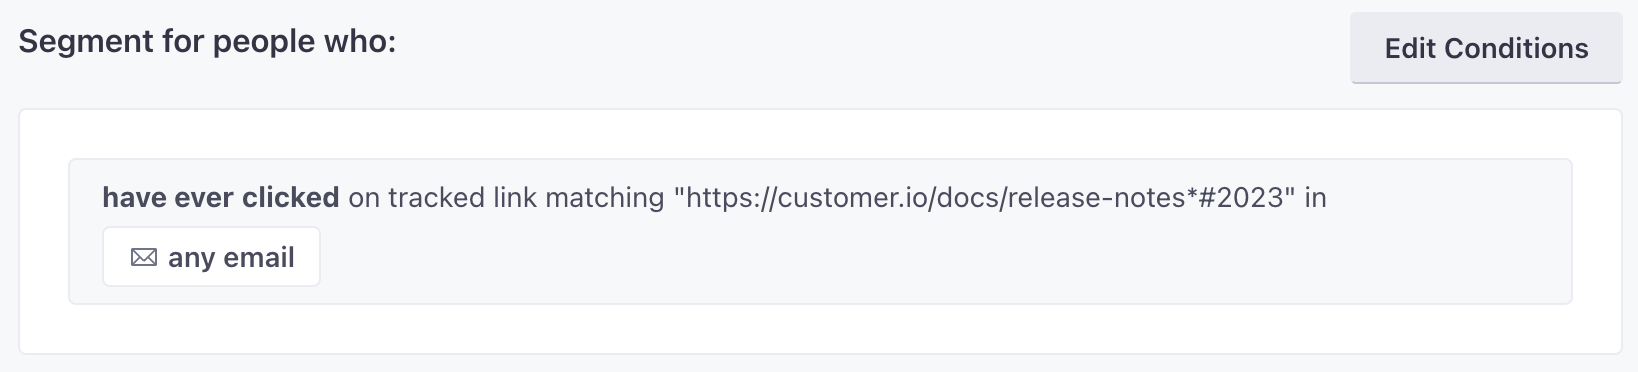 Segment for people who have everclicked on tracked link matching https://customer.io/docs/release-notes*#2023 in any email